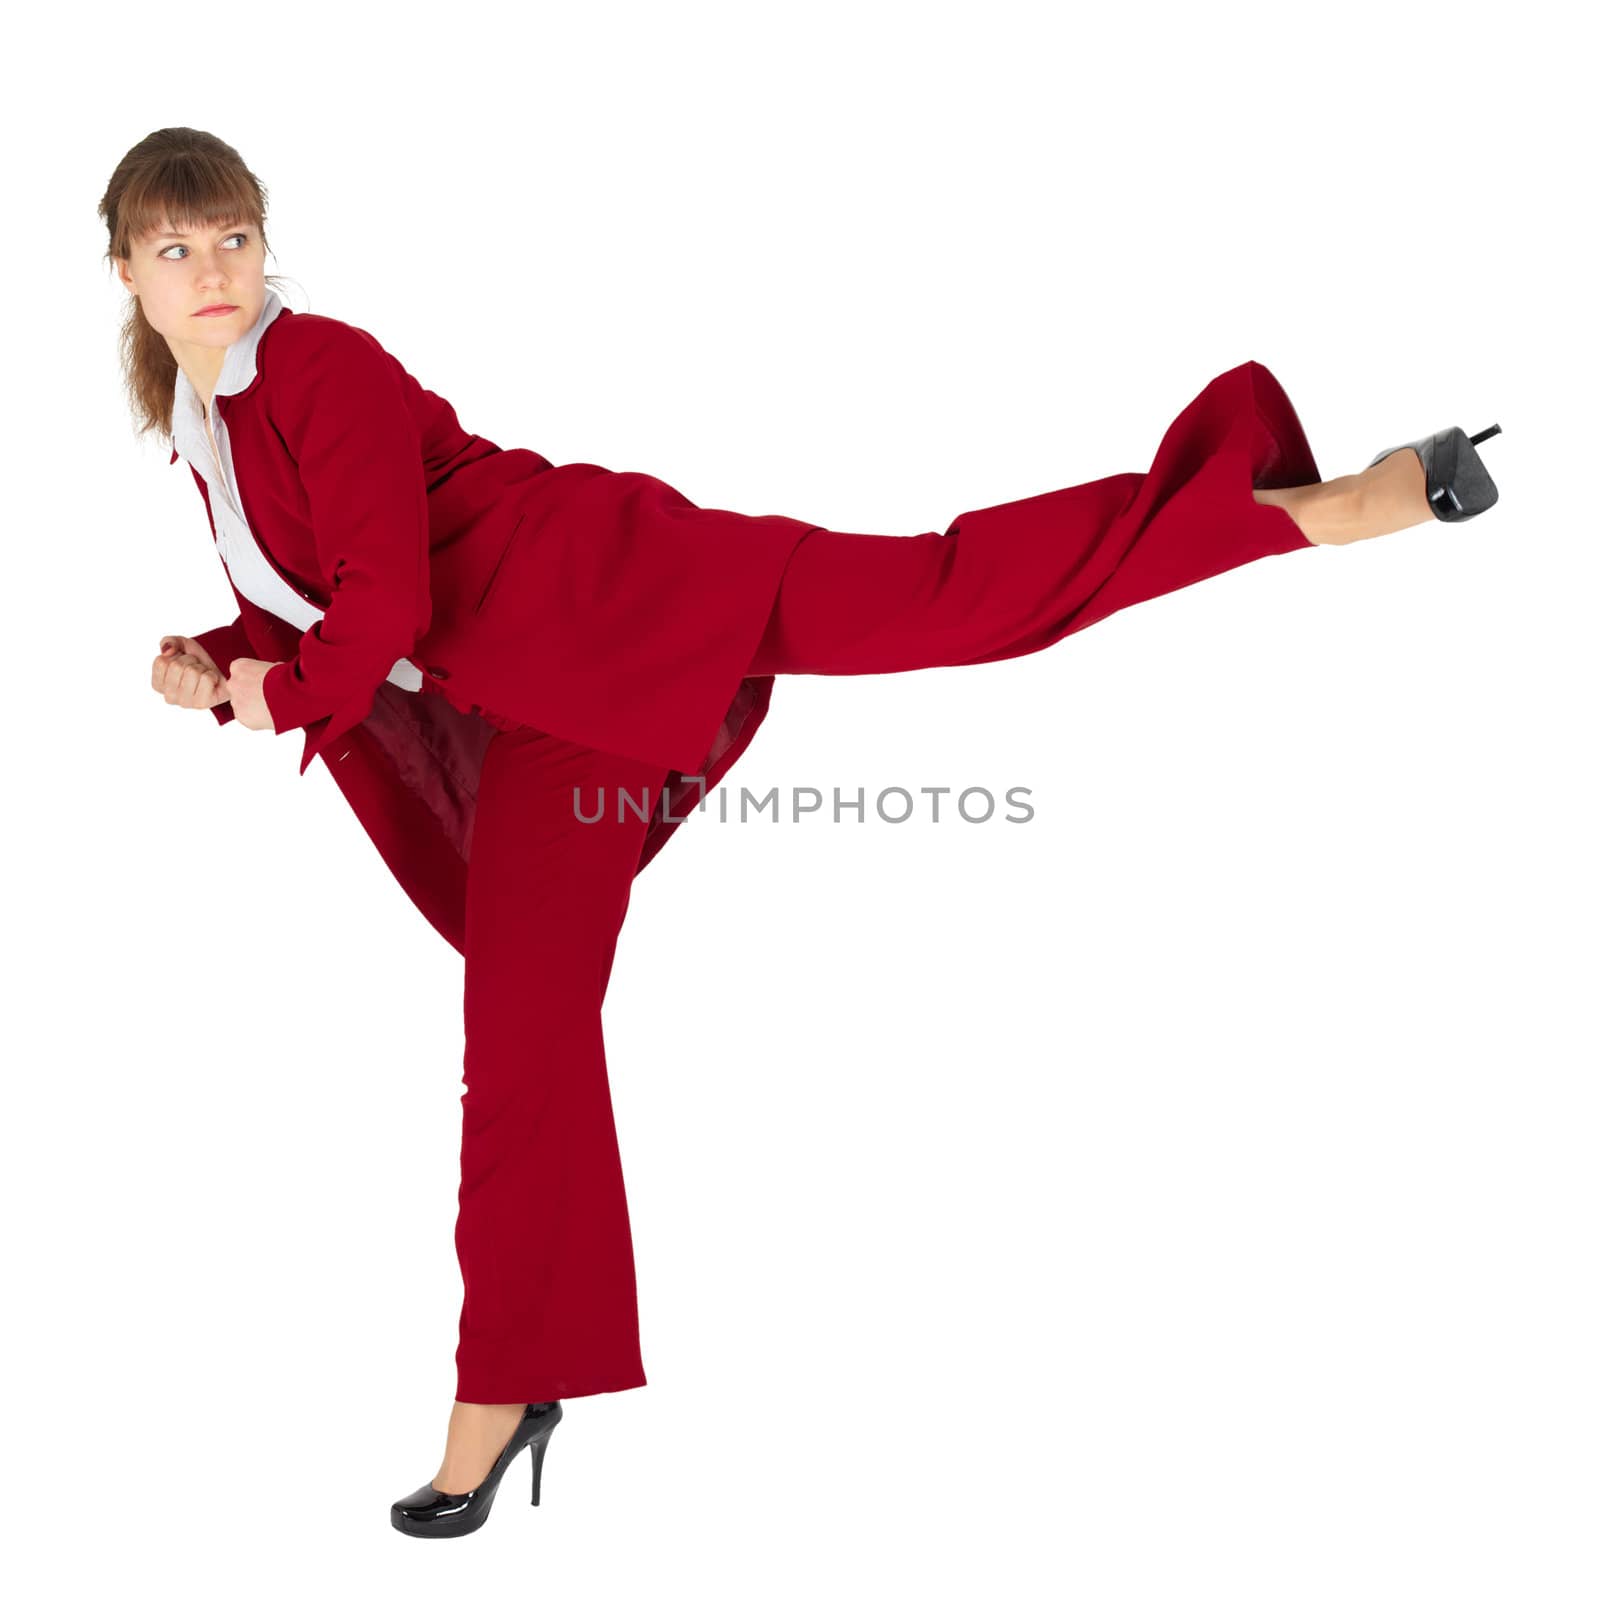 A young woman kicks back, isolated on a white background